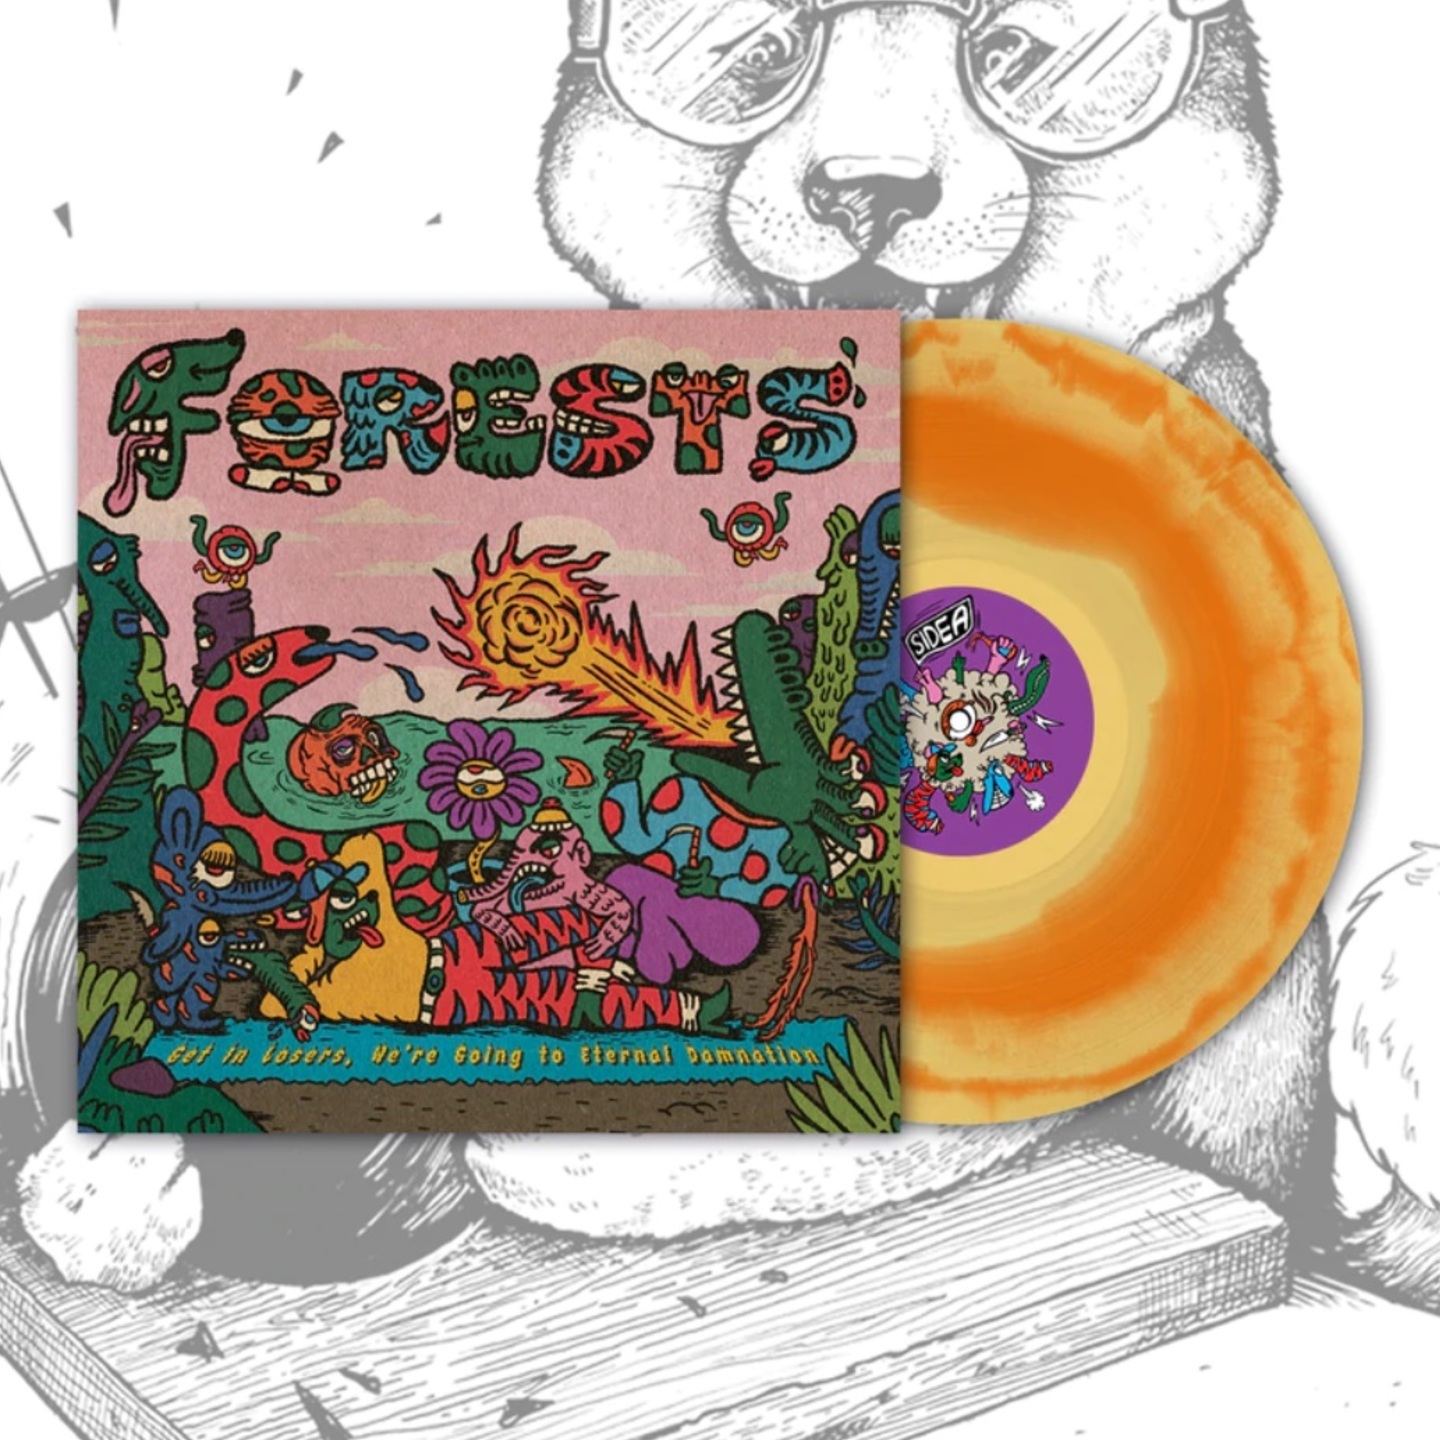 FORESTS - Get In Losers, Were Going To Eternal Damnation LP Orange  Yellow Swirl Vinyl